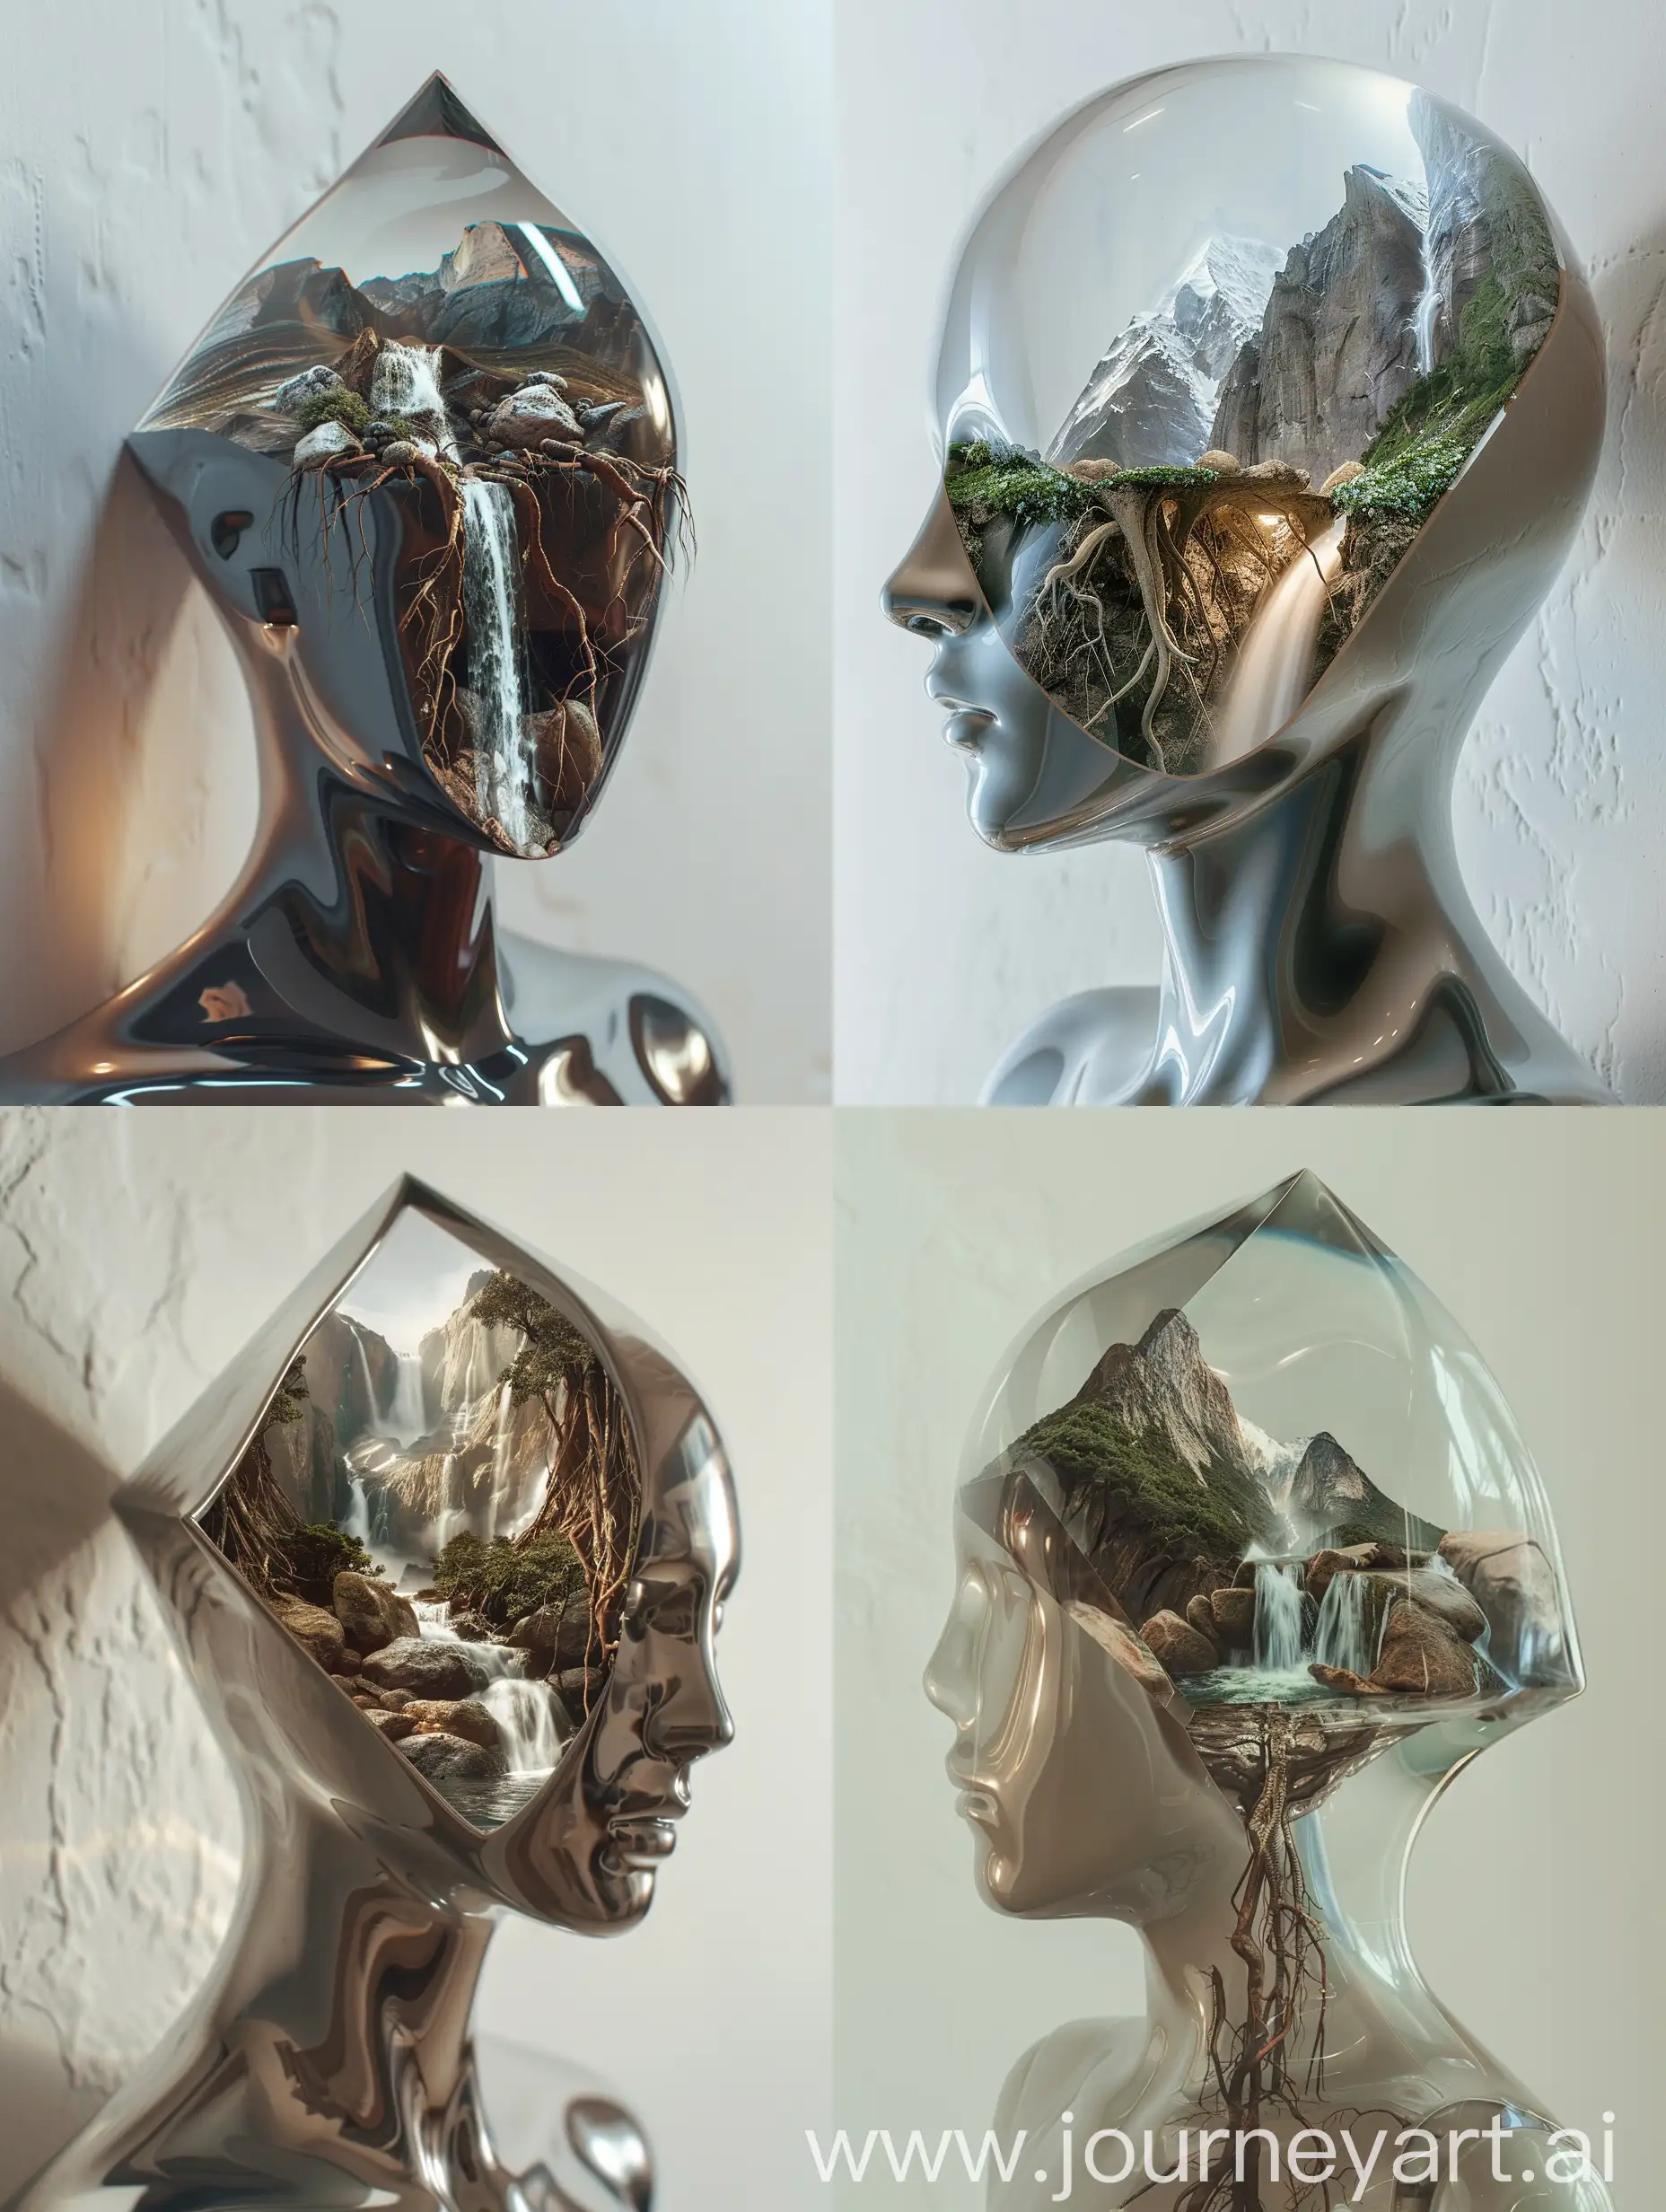 a mid-close-up cinematic creative photography portrait featuring a biomorphic translucent  smooth shiny  triangular shaped mannequin with a translucent triangular shaped head. Inside the head, there are mountains, rocks, roots, and a cascading waterfall, creating a eery scene. The composition captures the intricate details of the sculpture, emphasizing its artistic beauty. Set against a white wall background illuminated by the portrait exudes a captivating and ethereal ambiance.